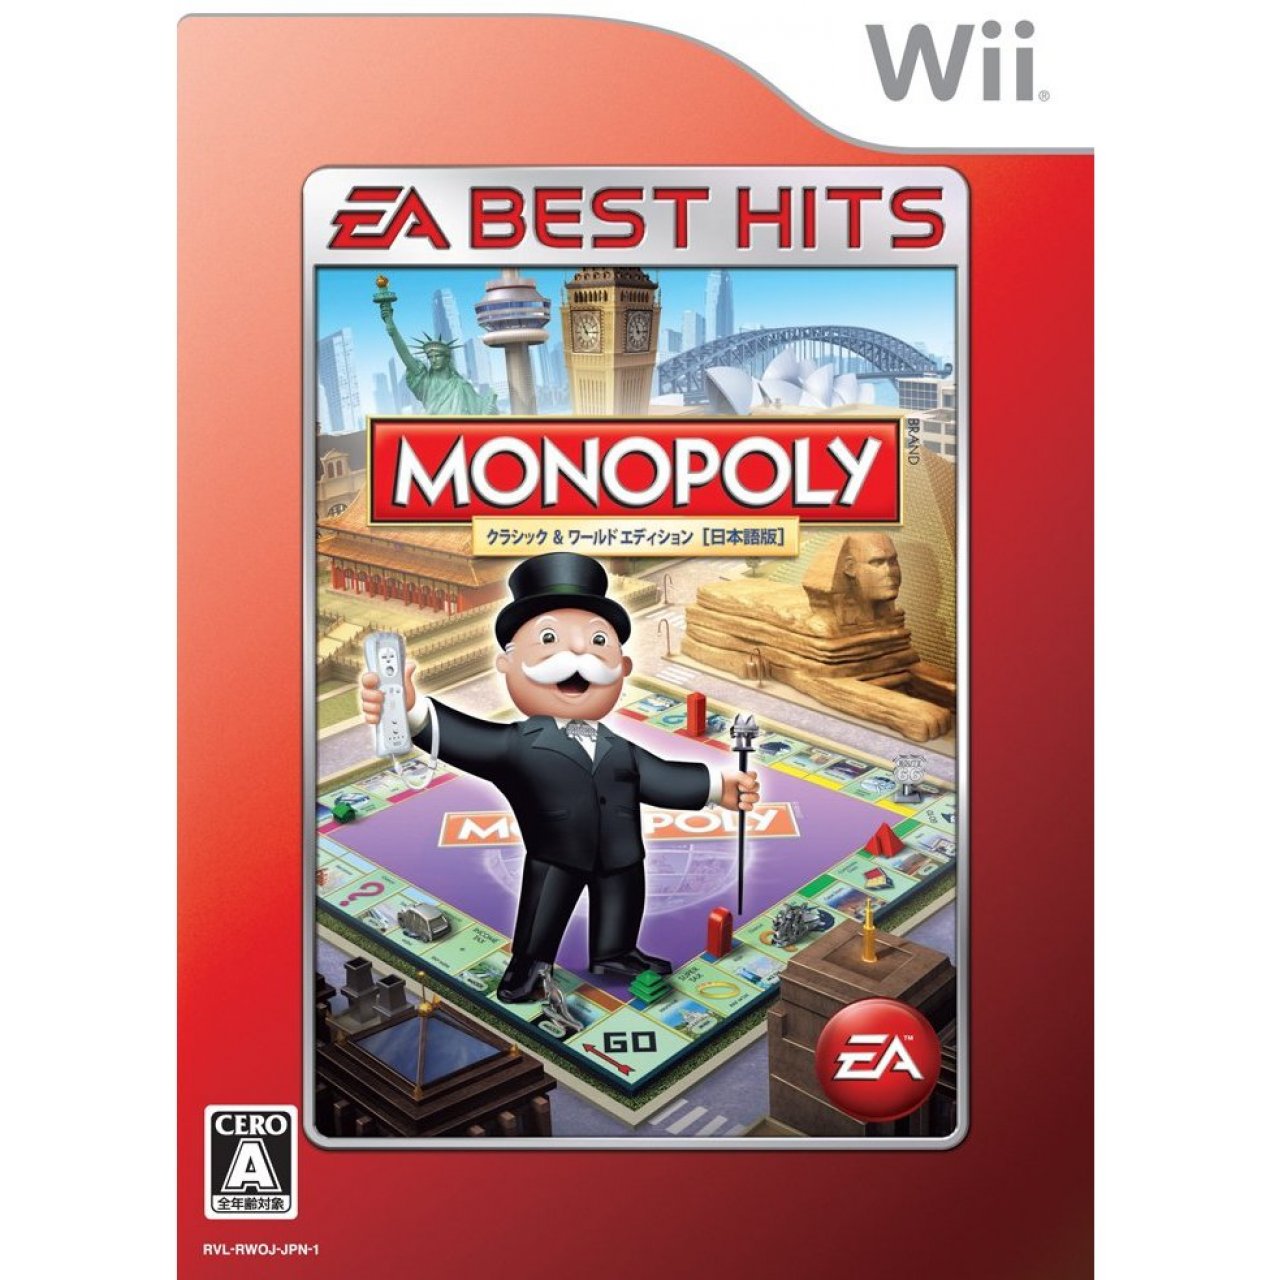 monopoly here and now pc full version